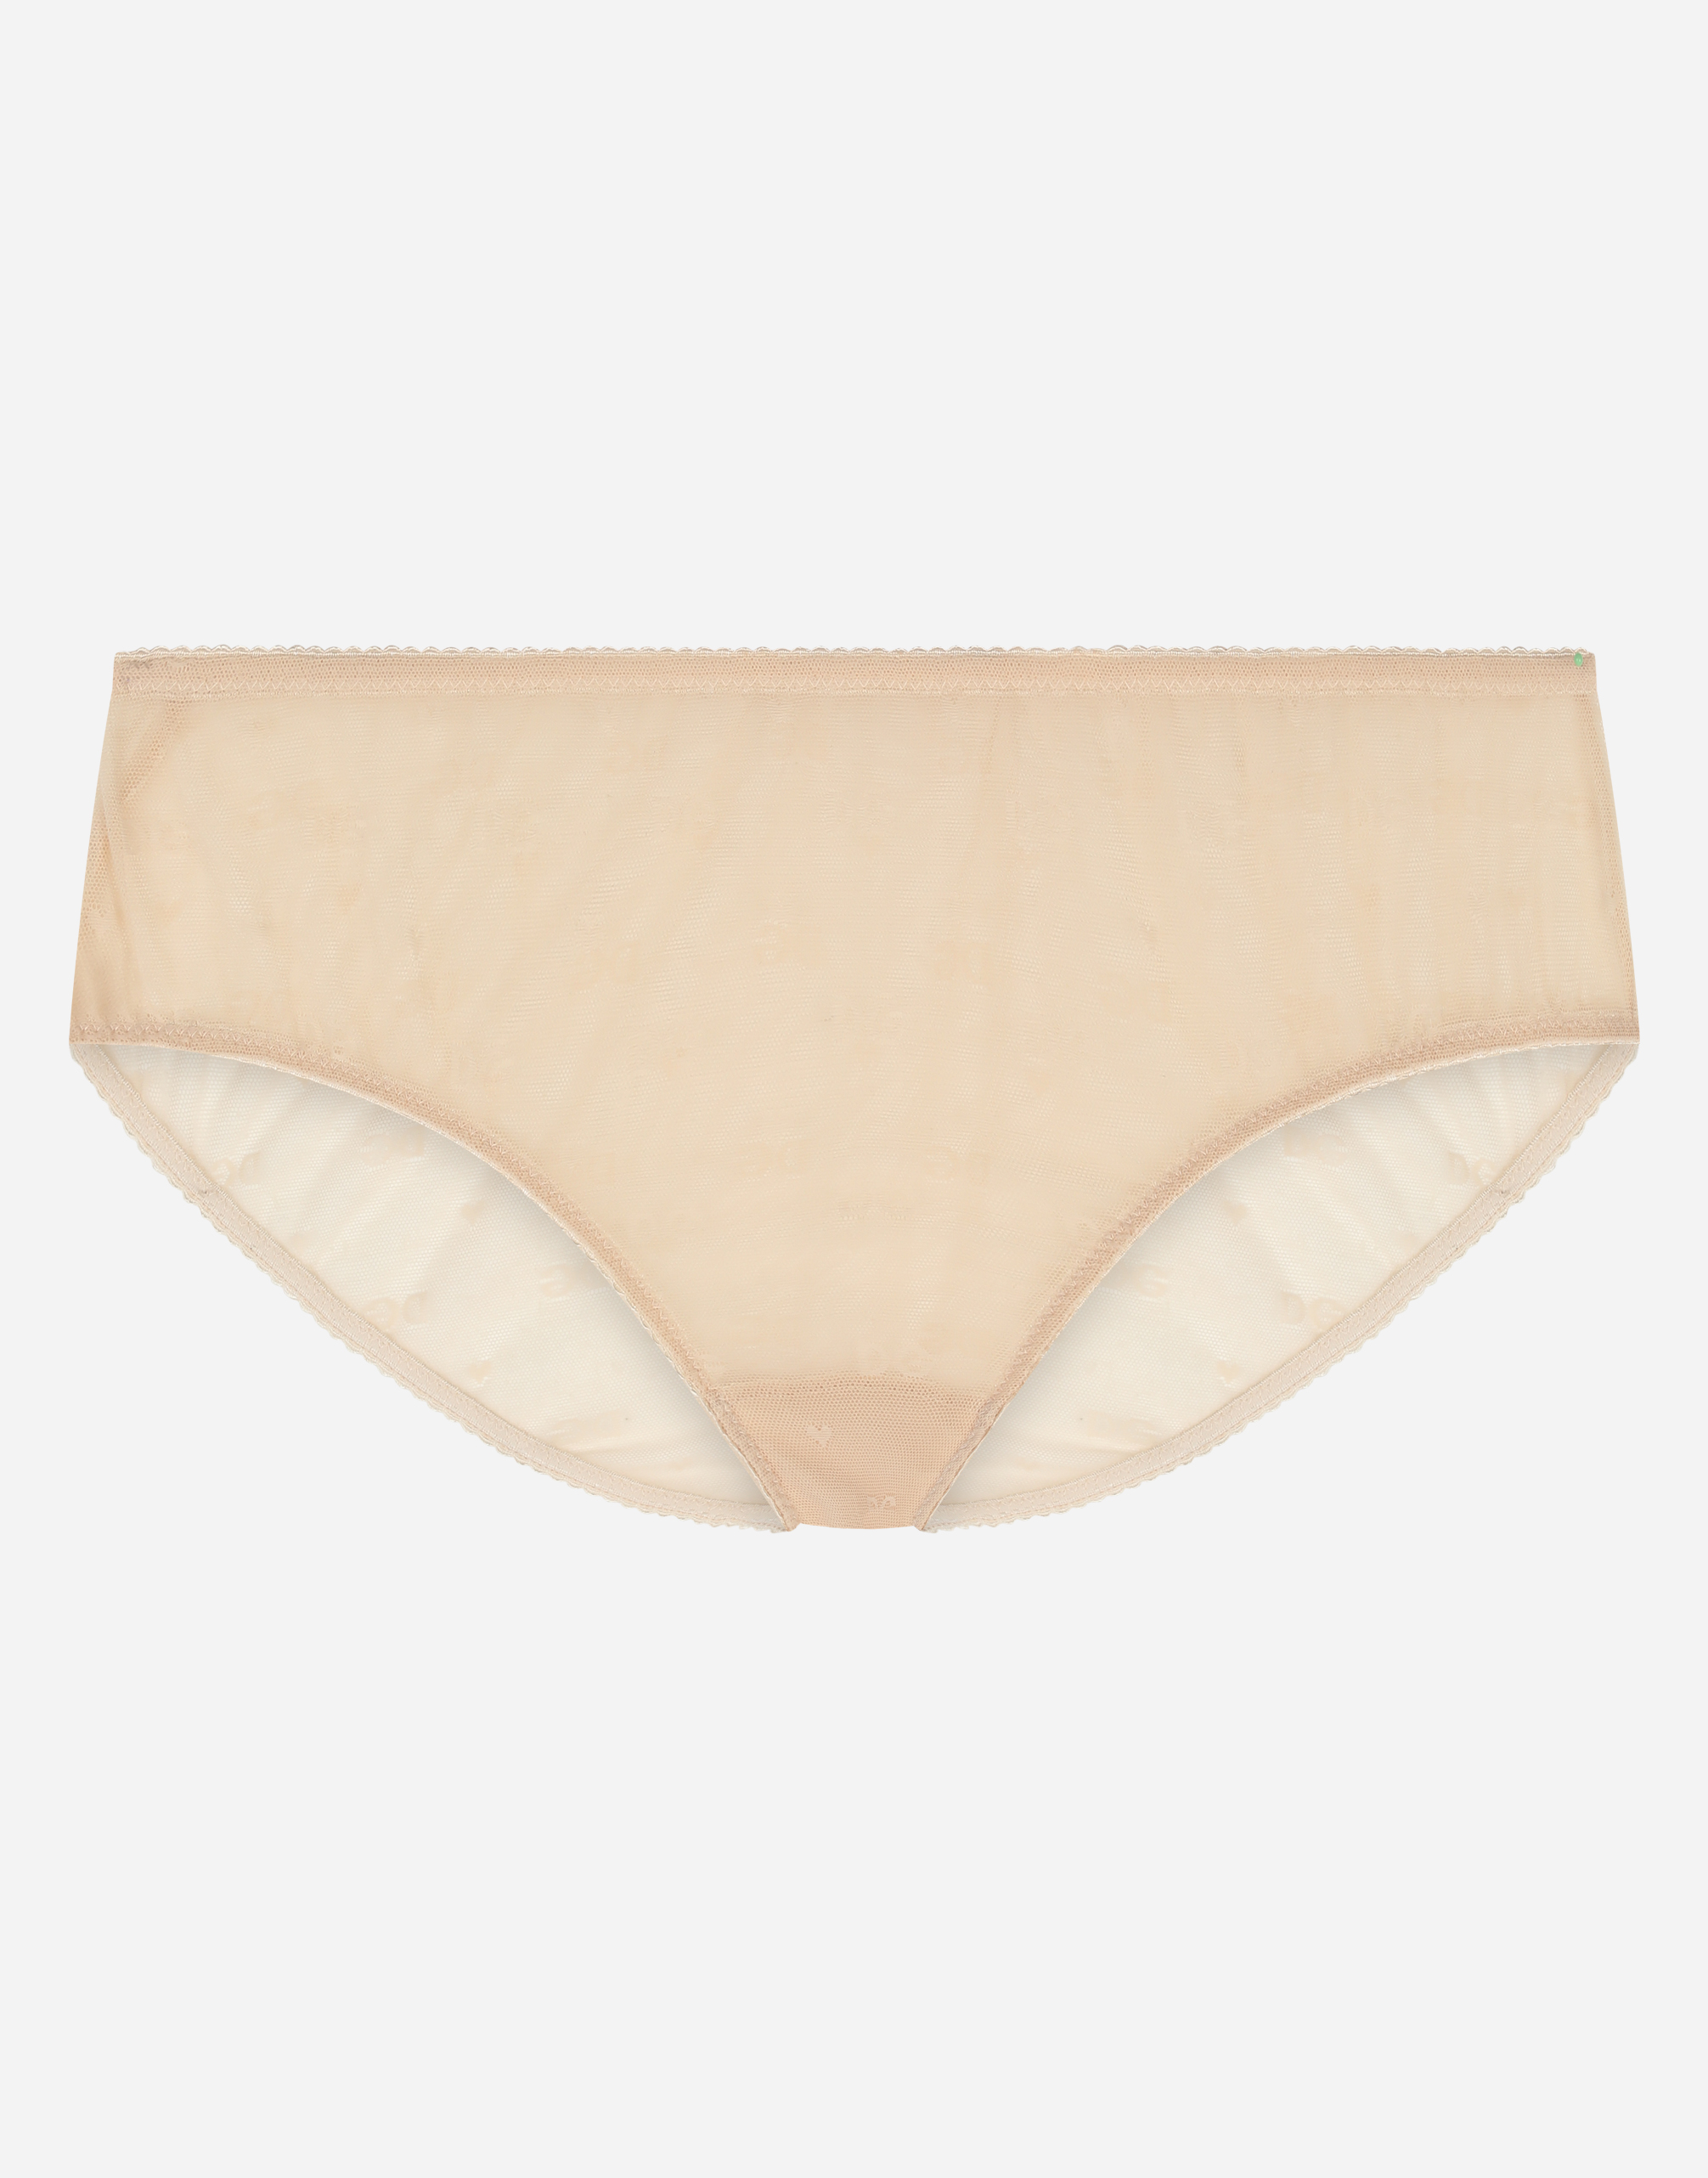 Jacquard tulle briefs in Pale Pink